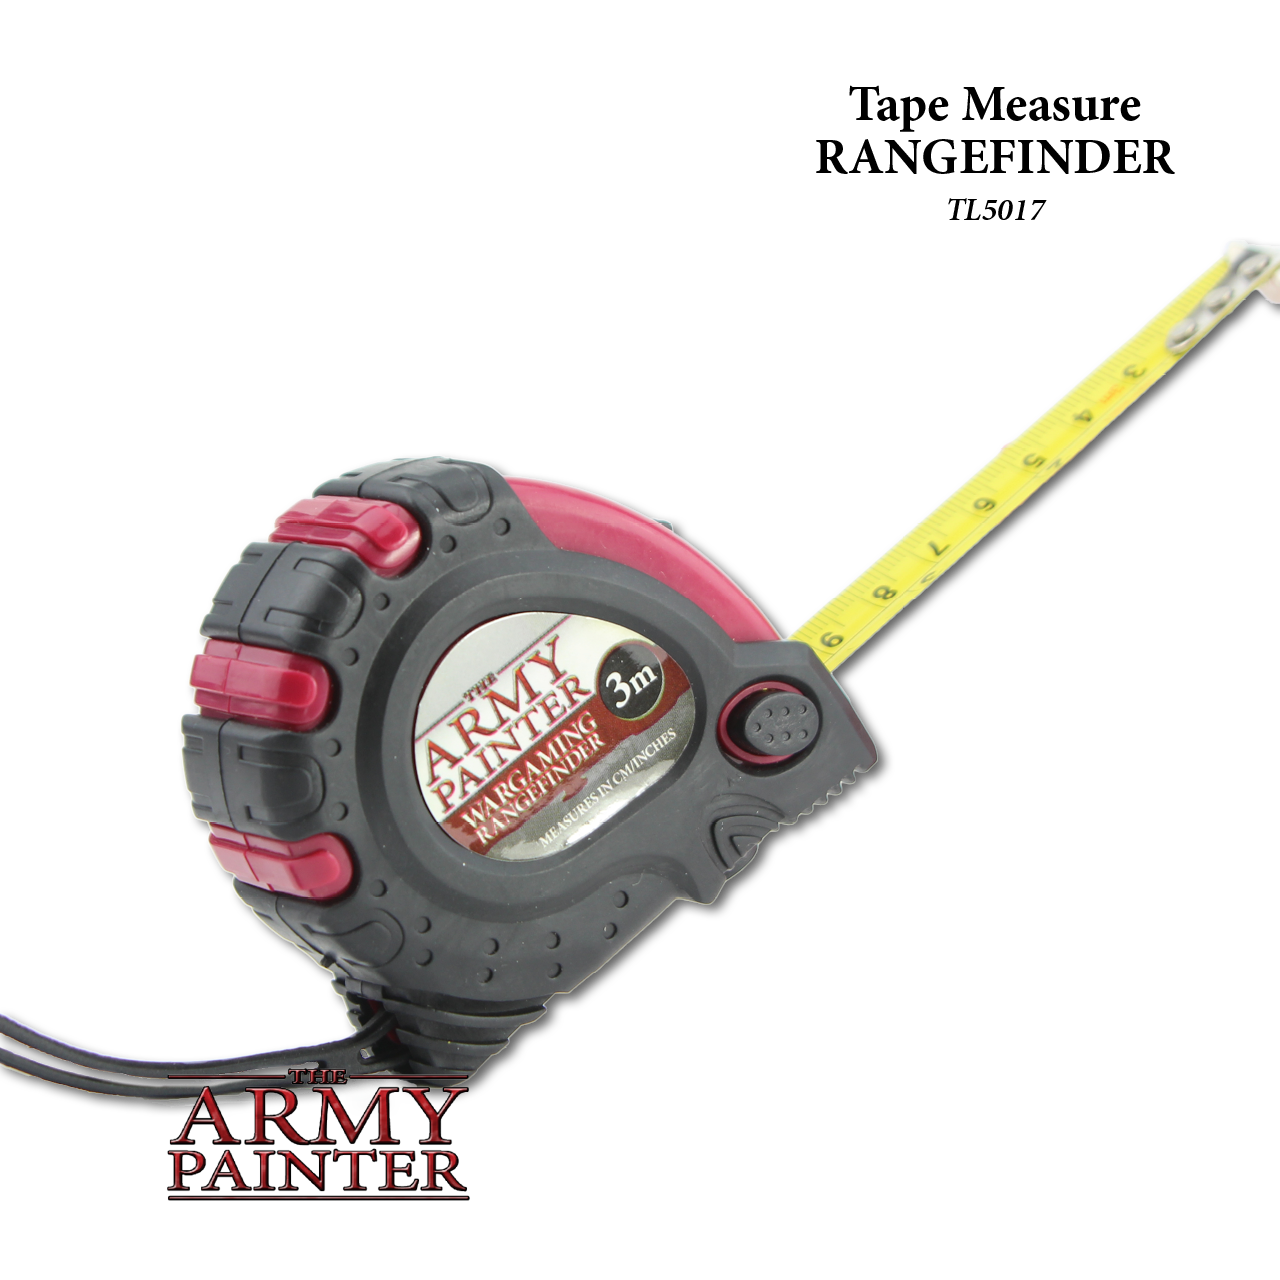 Army Painter Hobby Tools Rangefinder (Tape Measure) – Shall We